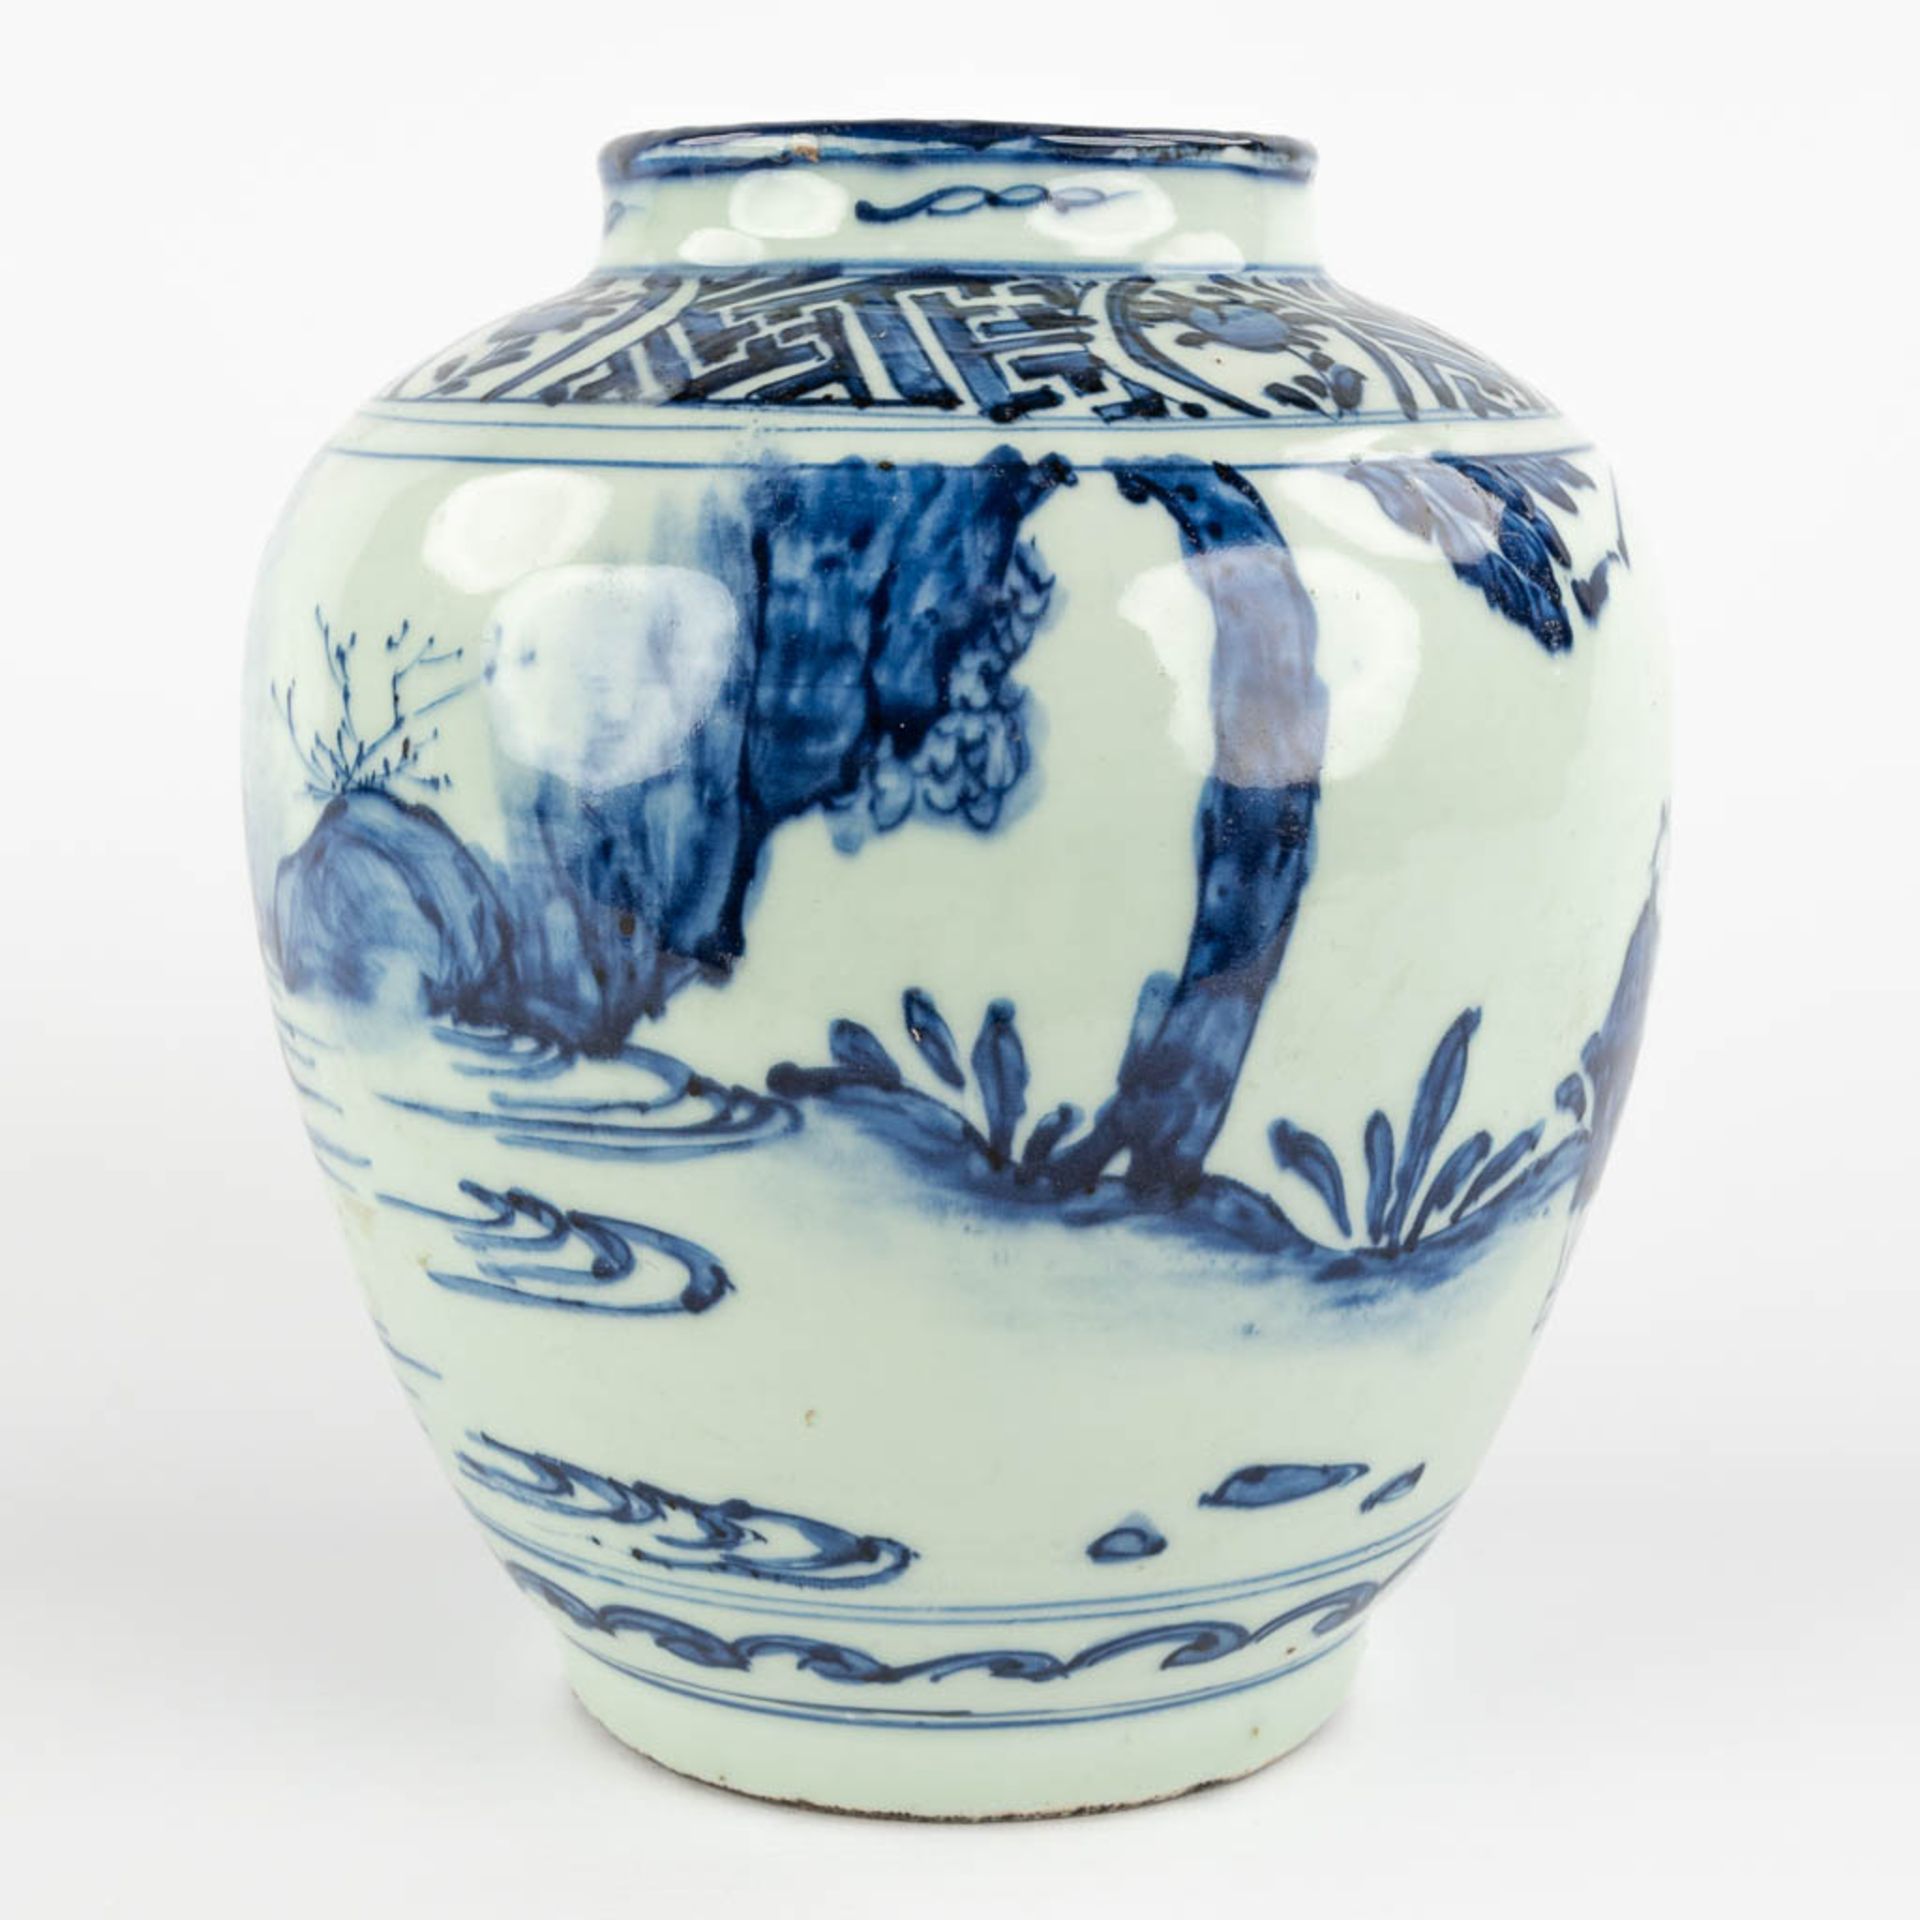 A Chinese pot with blue-white decor of a landscape with figurine. Possibly 17th C. (H:23 x D:20 cm) - Bild 5 aus 11